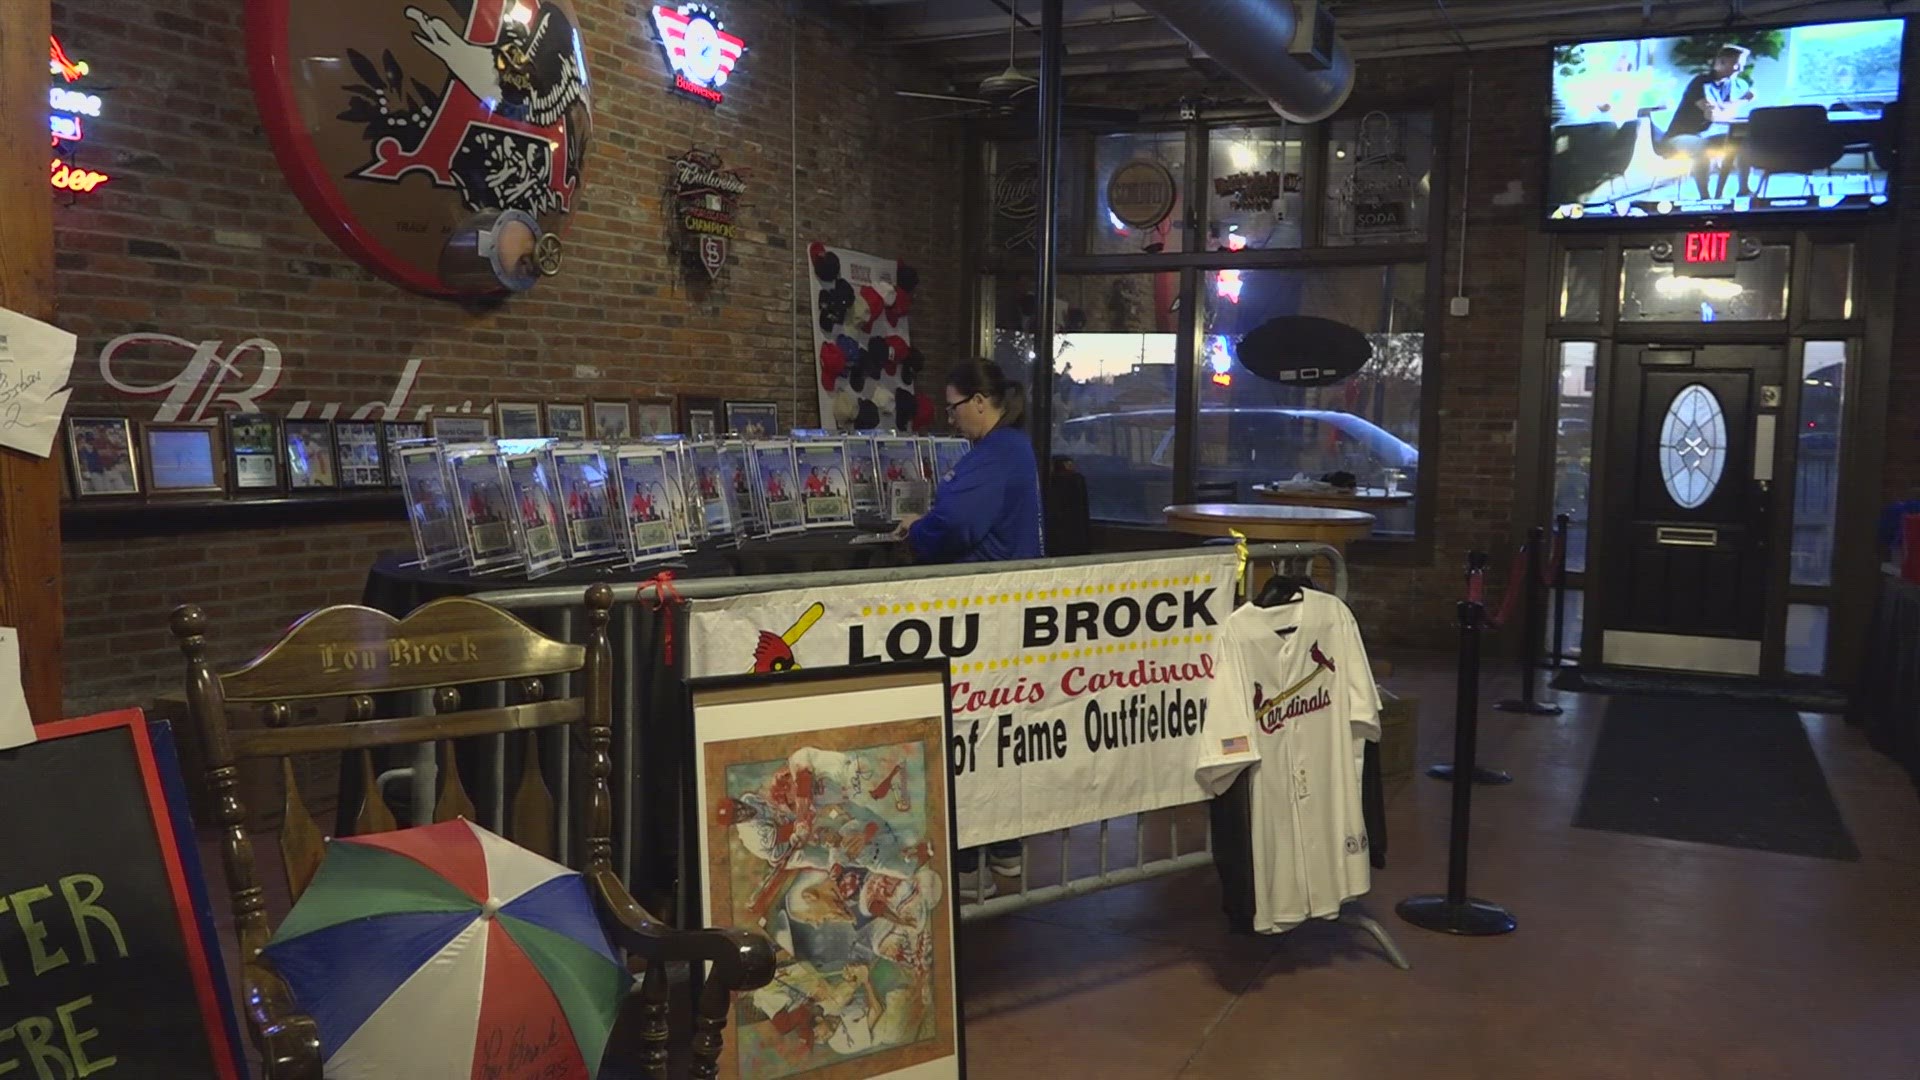 Paddy O's showcases exclusive memorabilia from MLB legend Lou Brock